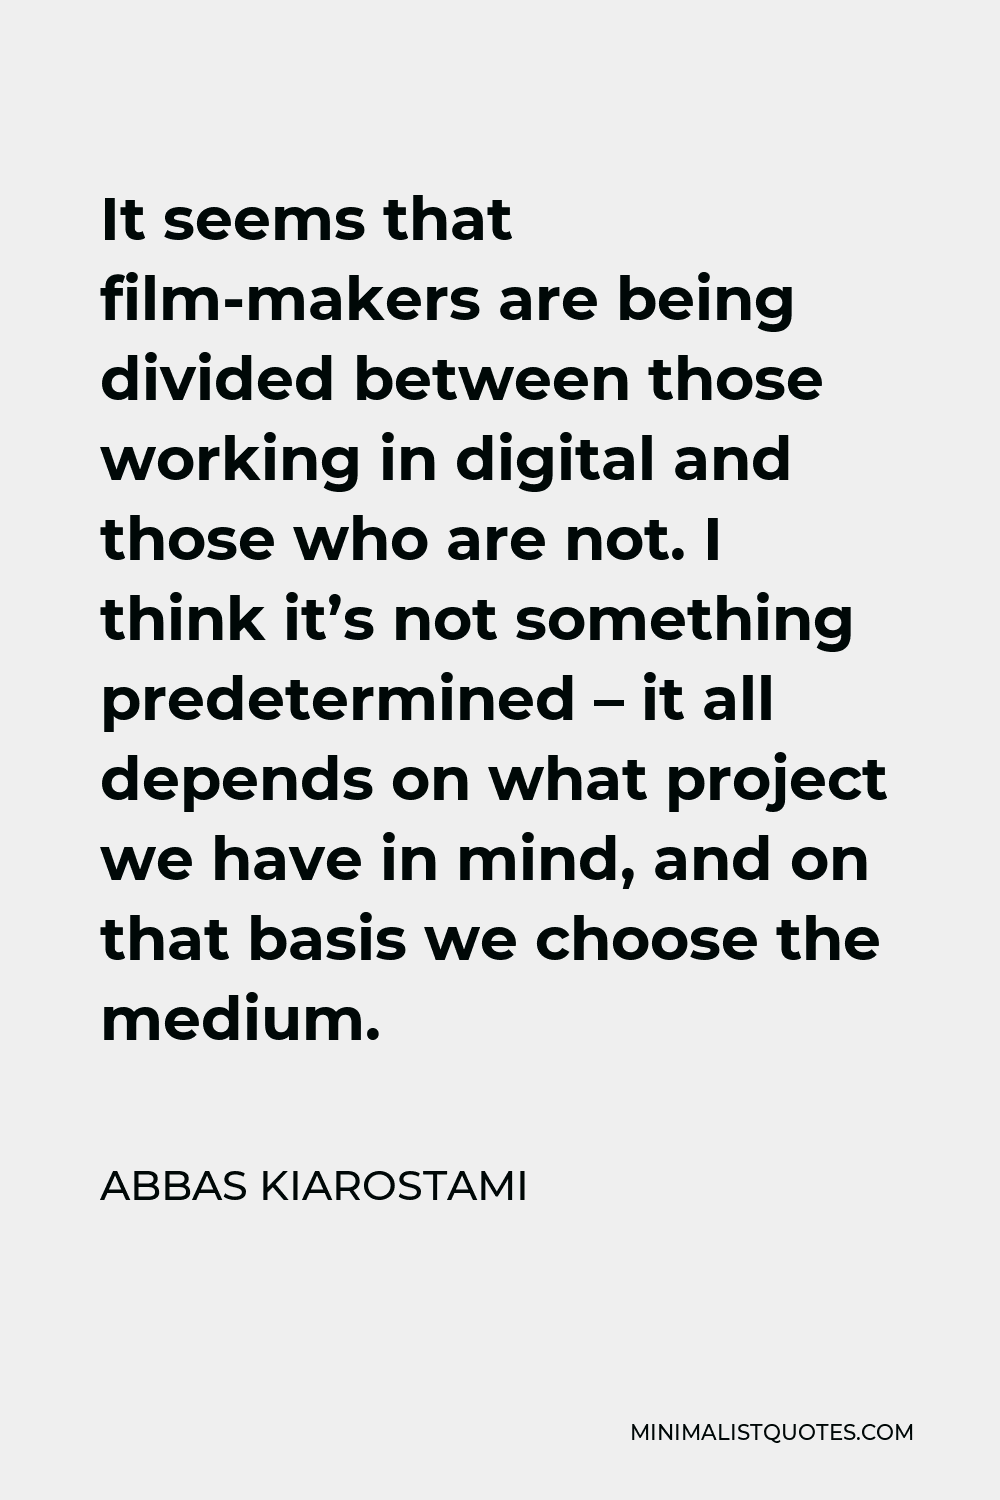 Abbas Kiarostami Quote - It seems that film-makers are being divided between those working in digital and those who are not. I think it’s not something predetermined – it all depends on what project we have in mind, and on that basis we choose the medium.